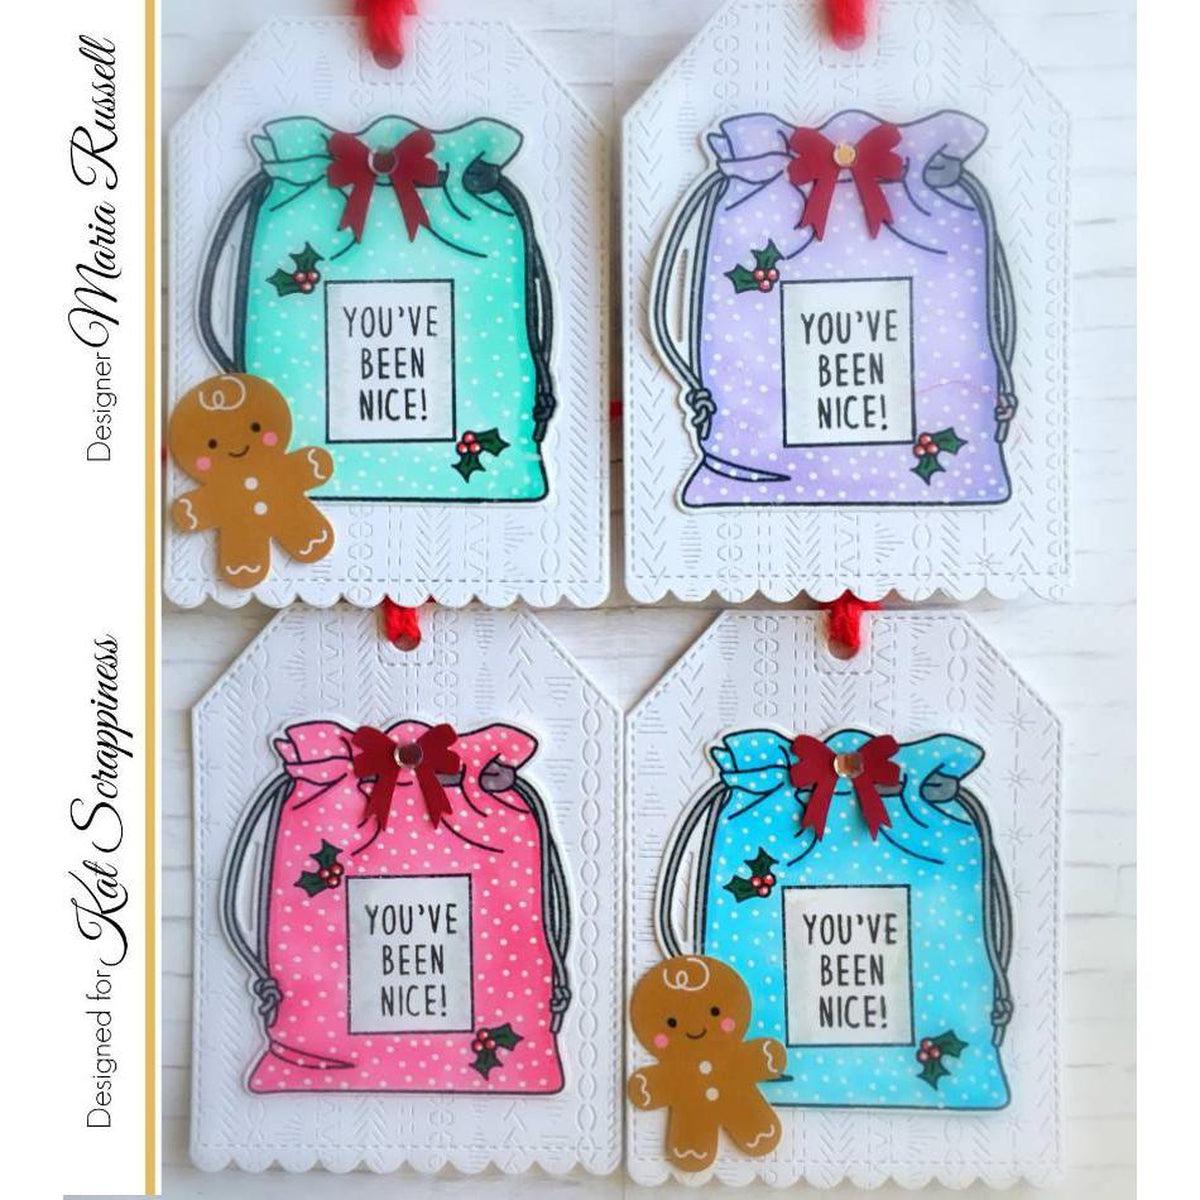 Stitched Scalloped Nesting Tags Dies by Kat Scrappiness - Kat Scrappiness